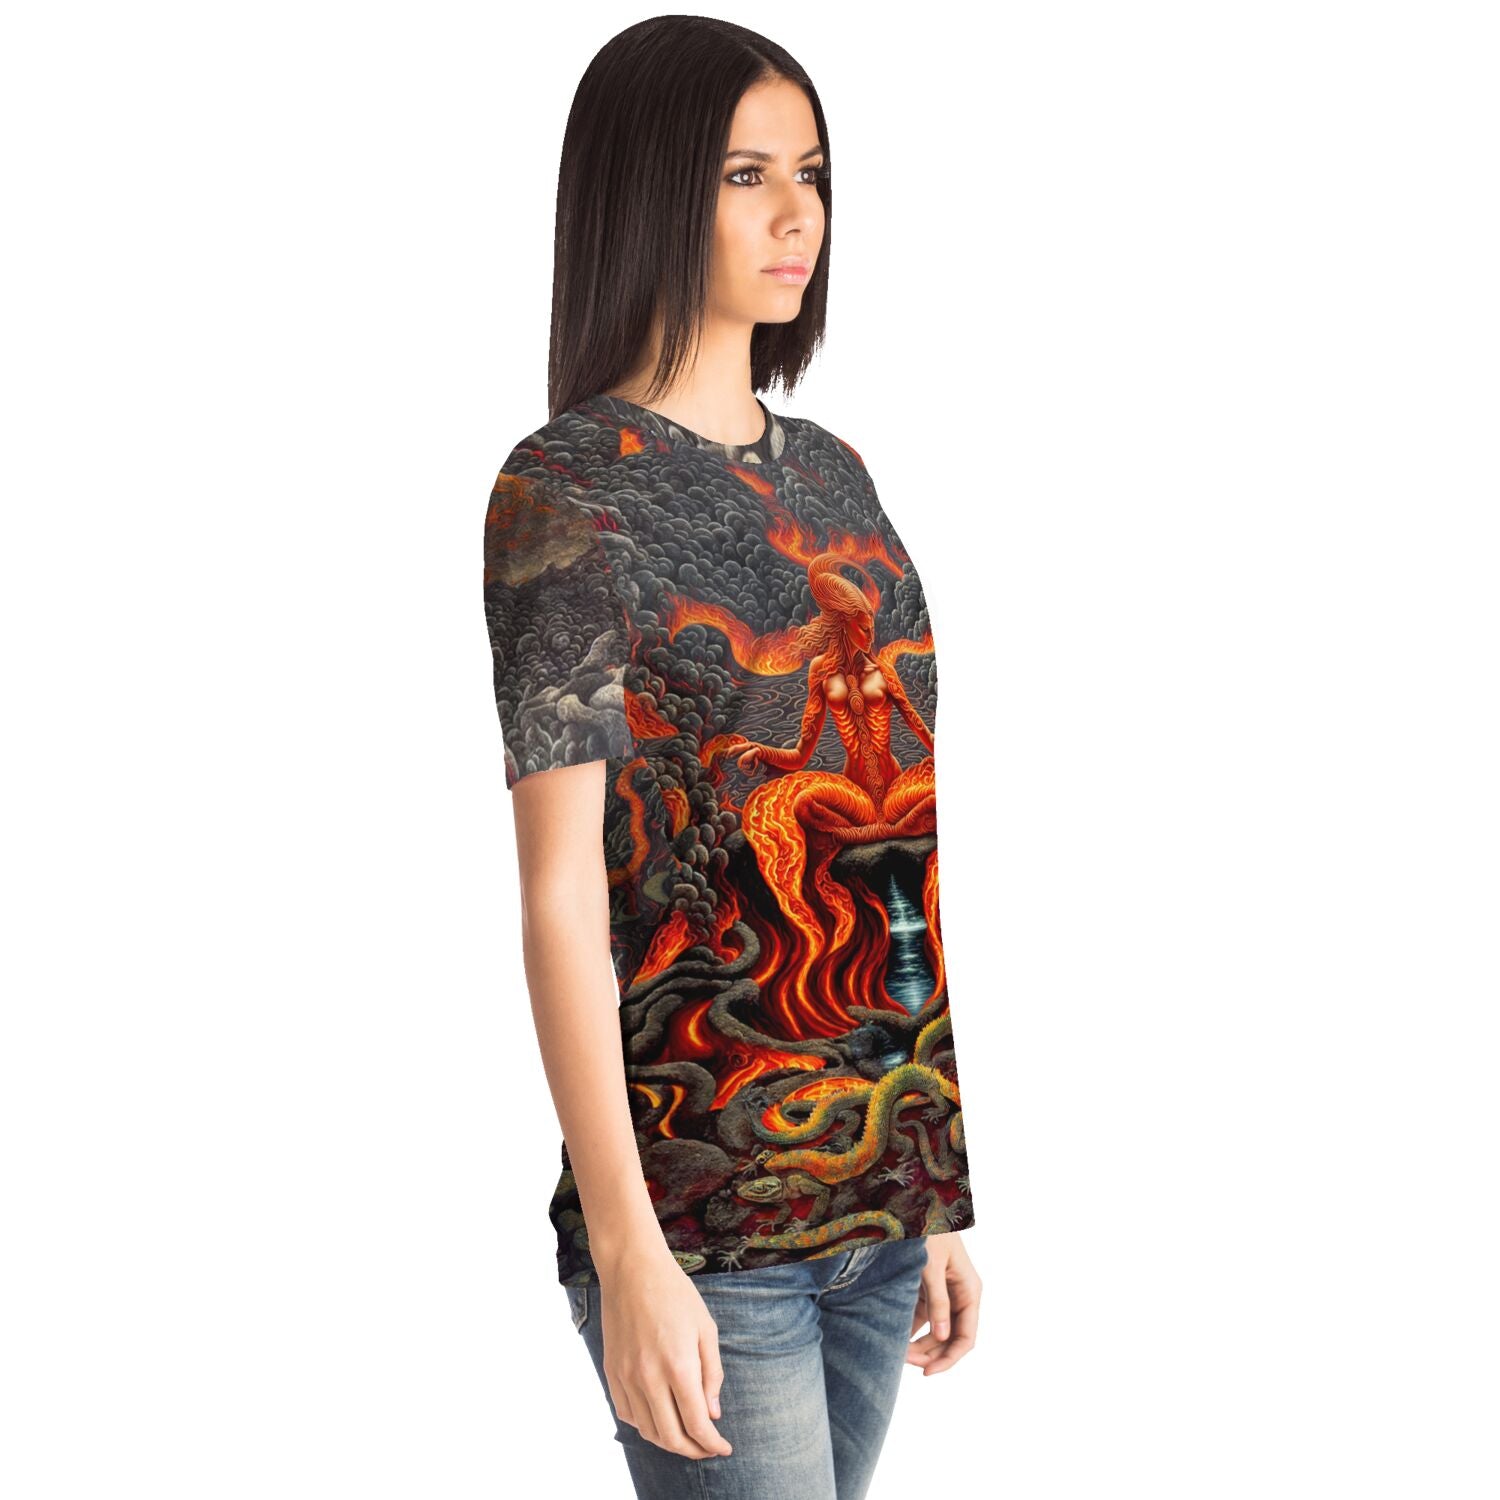 T-shirt Gaia: Elemental Goddess of Earth, Wind, Fire, Water | Mother Earth, Born out of Chaos | Empowered Woman, James Lovelock Graphic Art T-Shirt